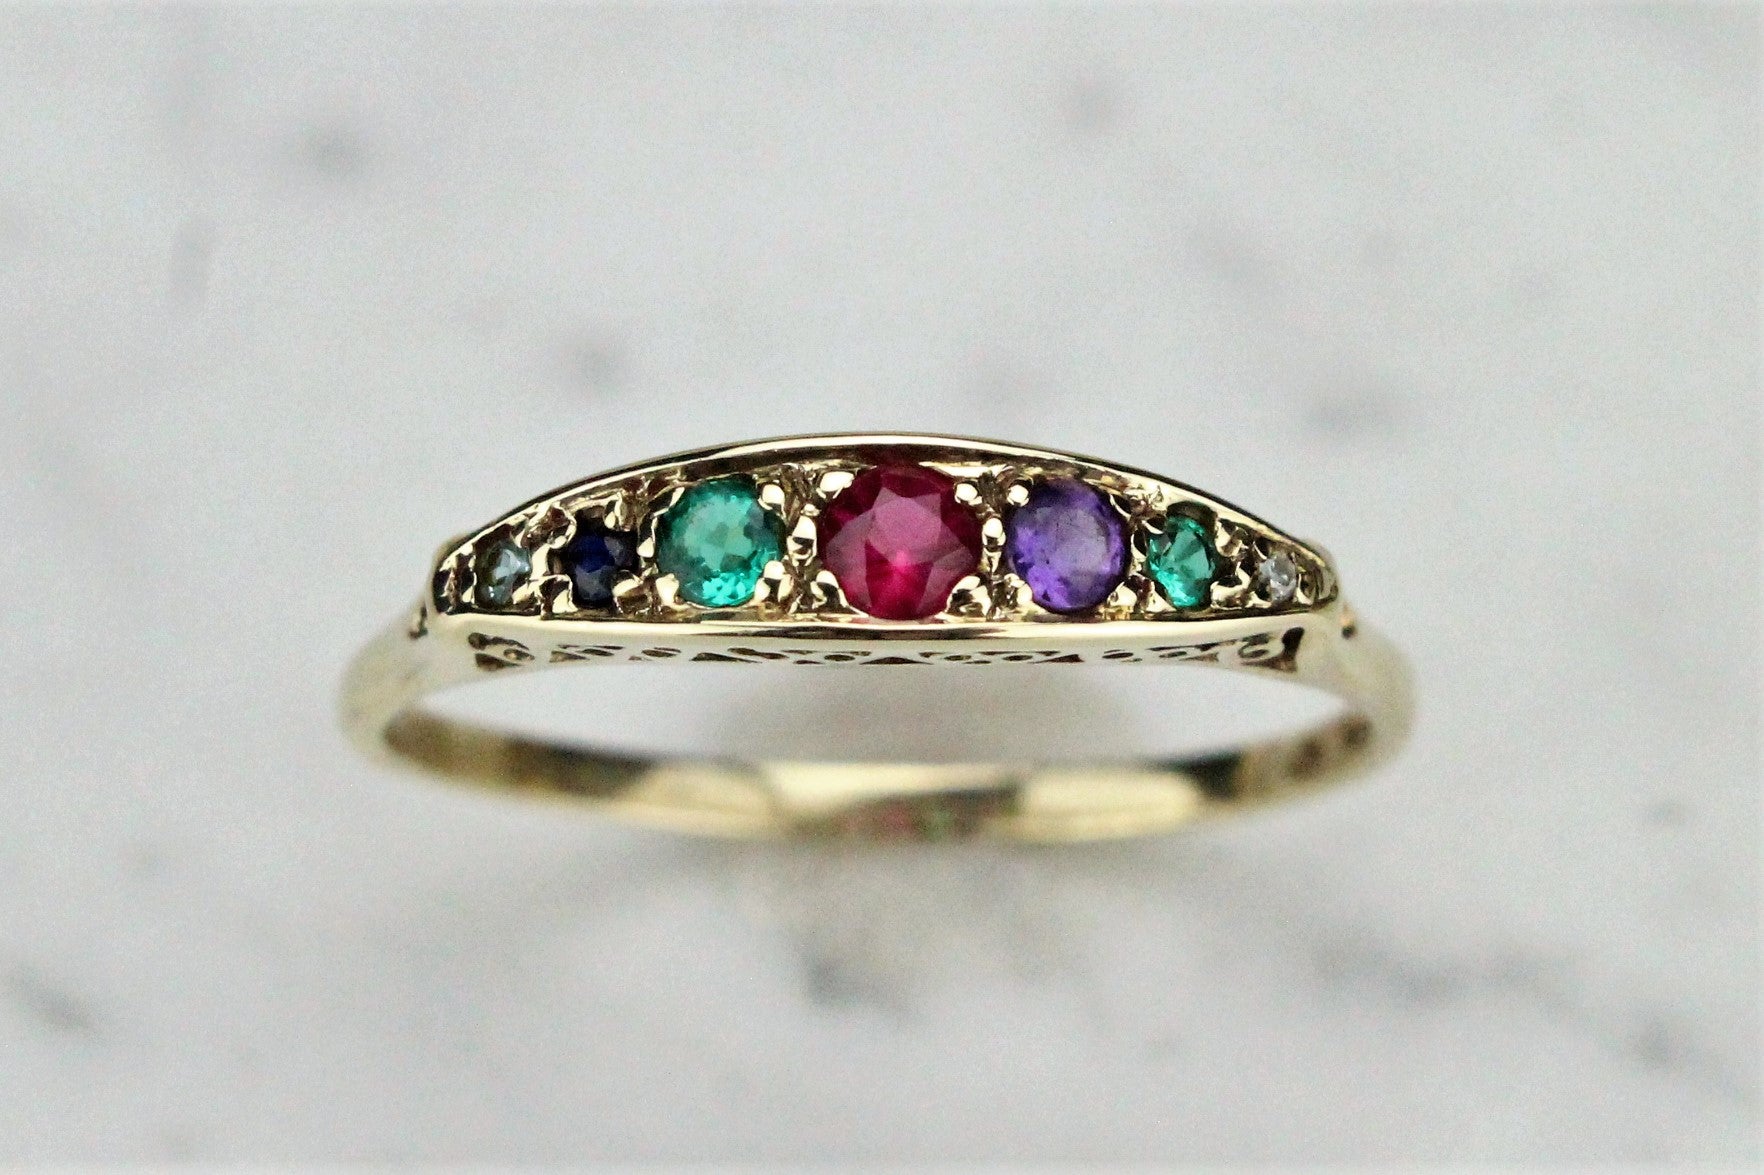 VINTAGE VICTORIAN STYLE 'DEAREST' RING ON 9ct YELLOW GOLD - Rock